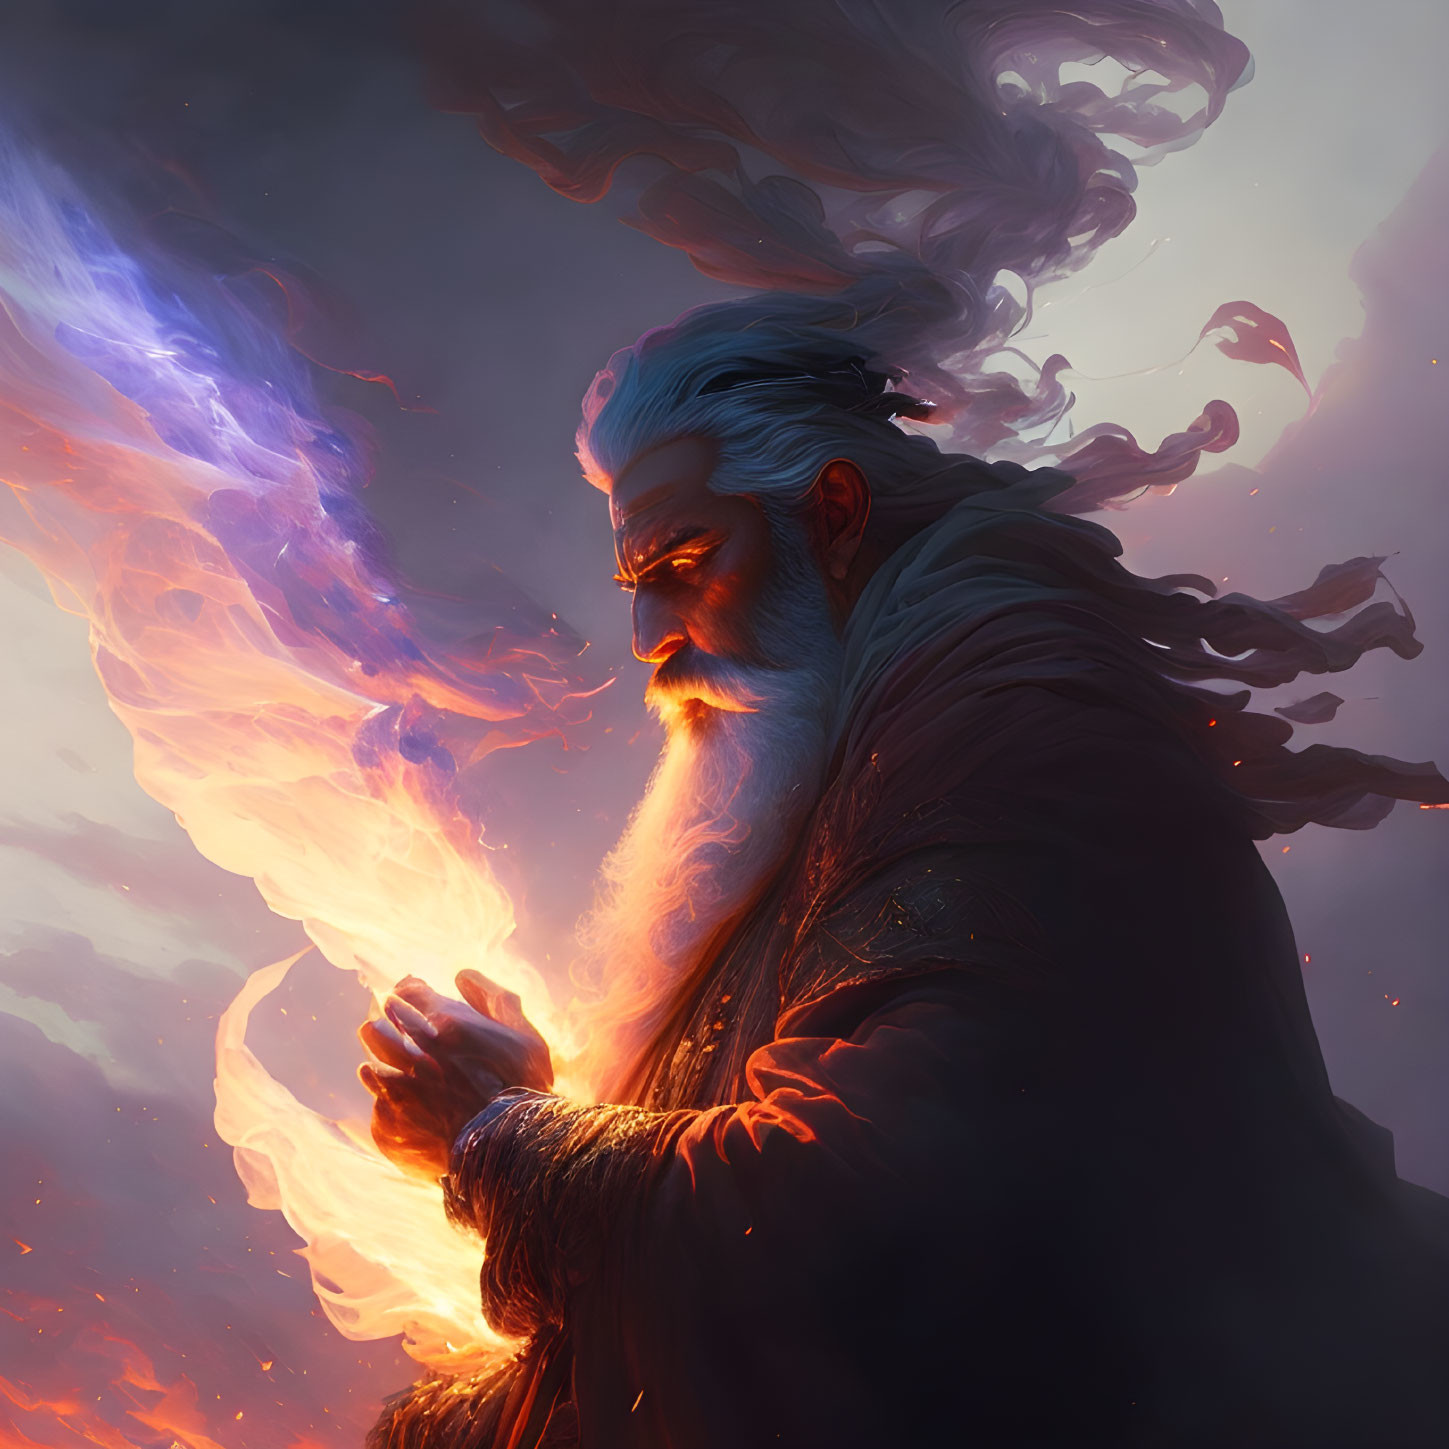 Elderly wizard conjures flame with mystical smoke in sunset sky